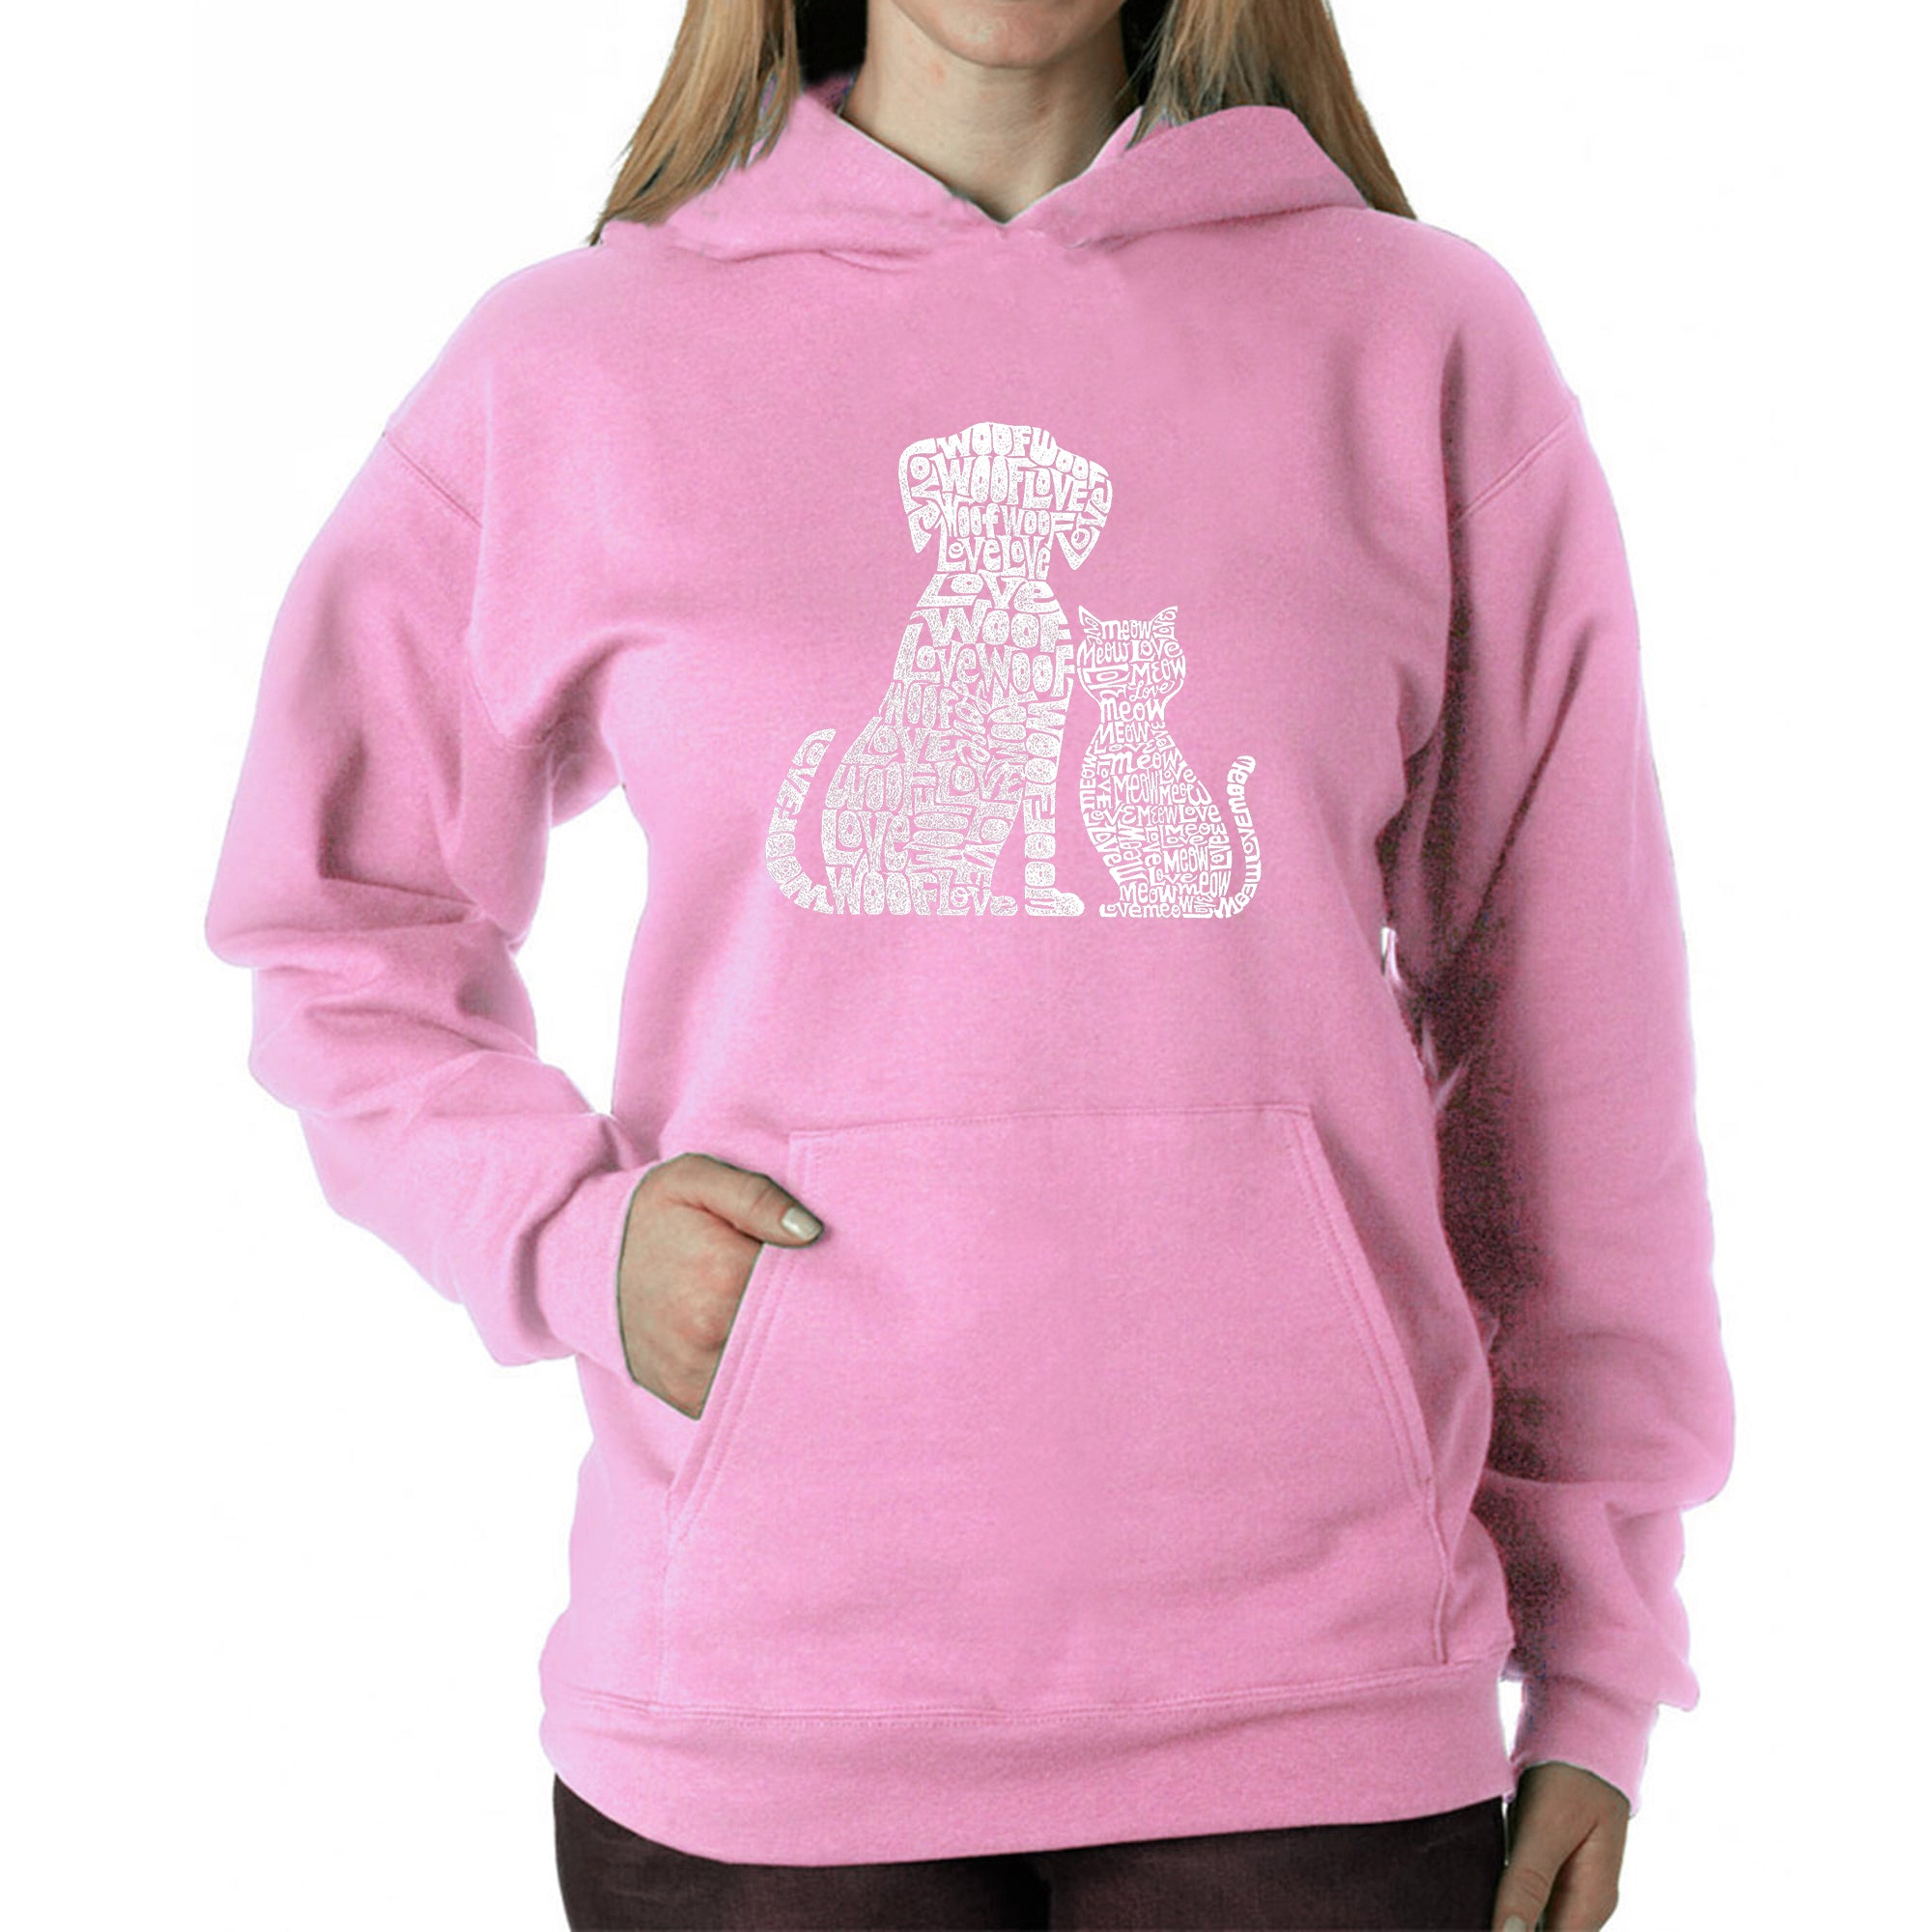 Dogs And Cats - Women's Word Art Hooded Sweatshirt - Black - Large